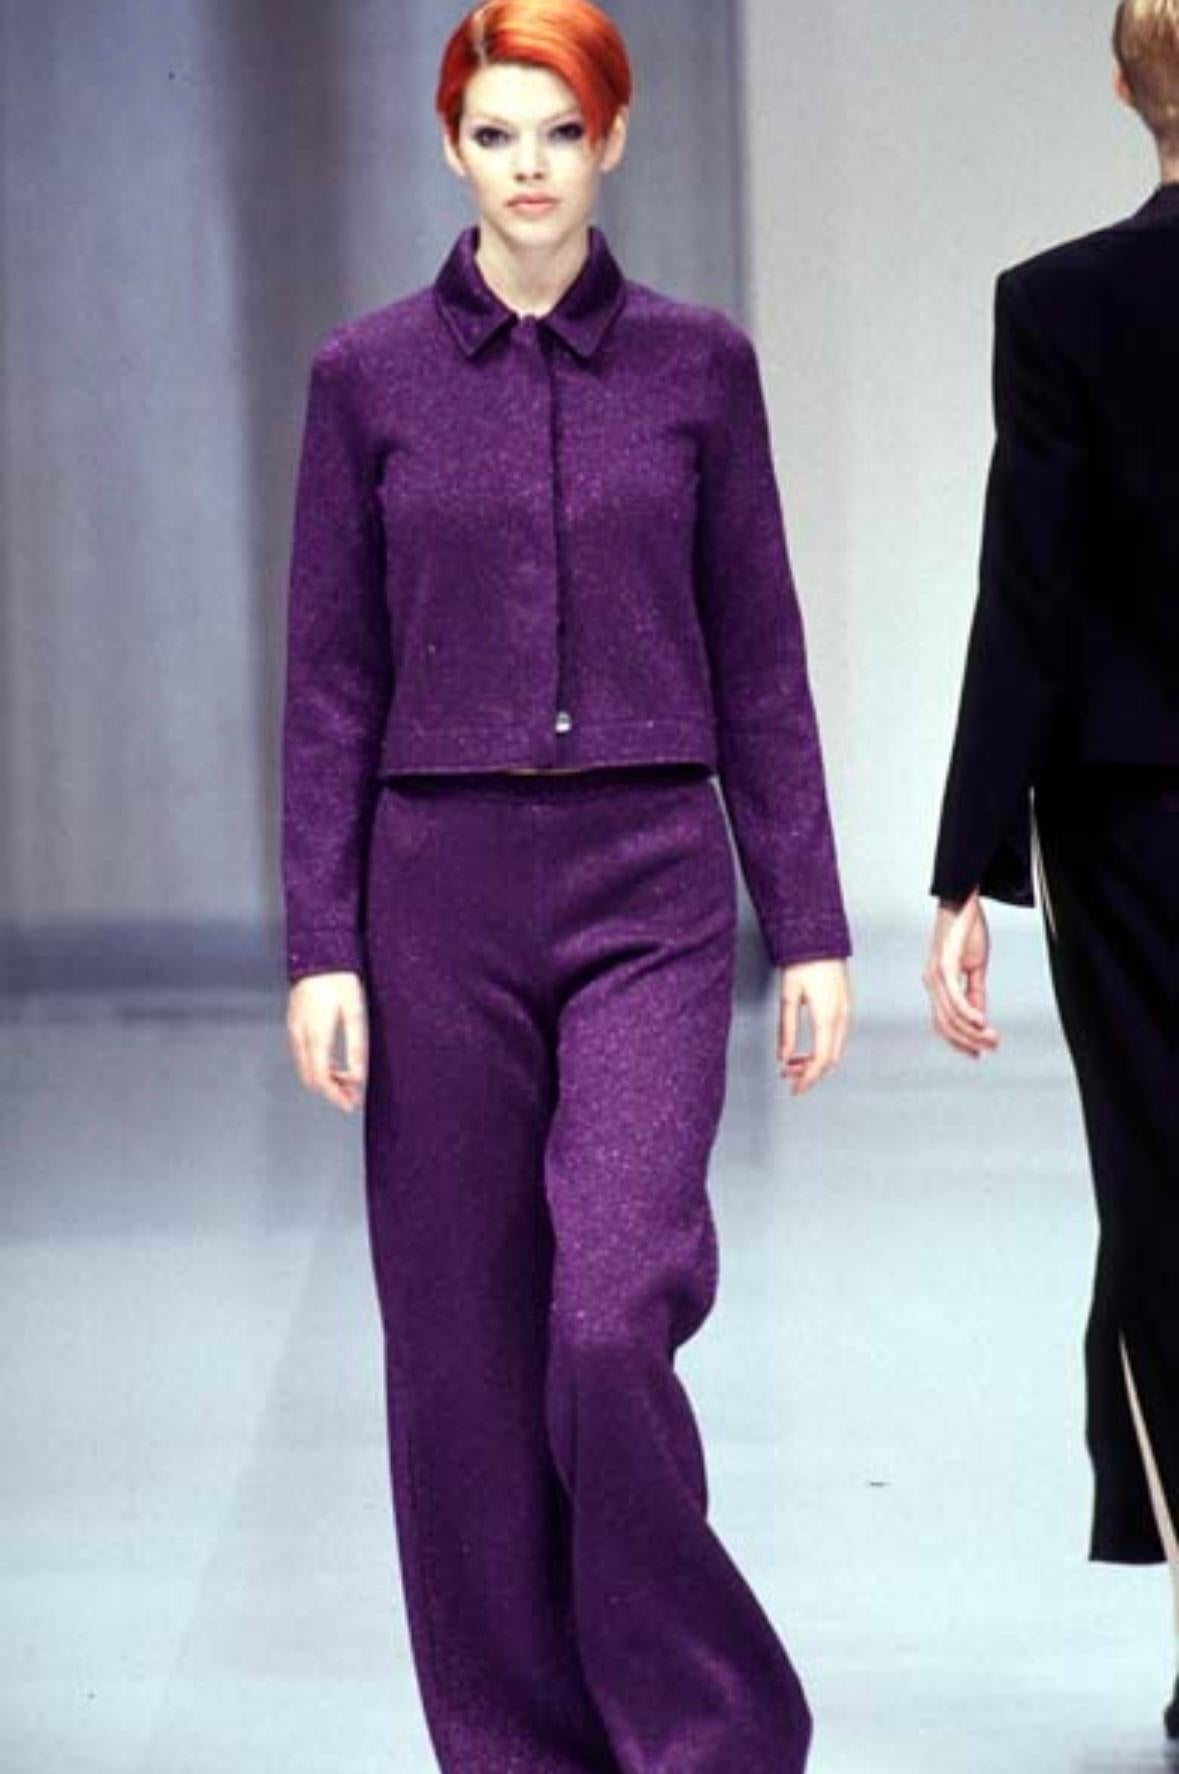 Presenting a fabulous dark purple Salvatore Ferragamo knit jacket. From the Fall/Winter 1996 collection, this jacket features a fold-over collar and concealed button closure. This metallic woven jacket debuted on the runway and perfectly catches